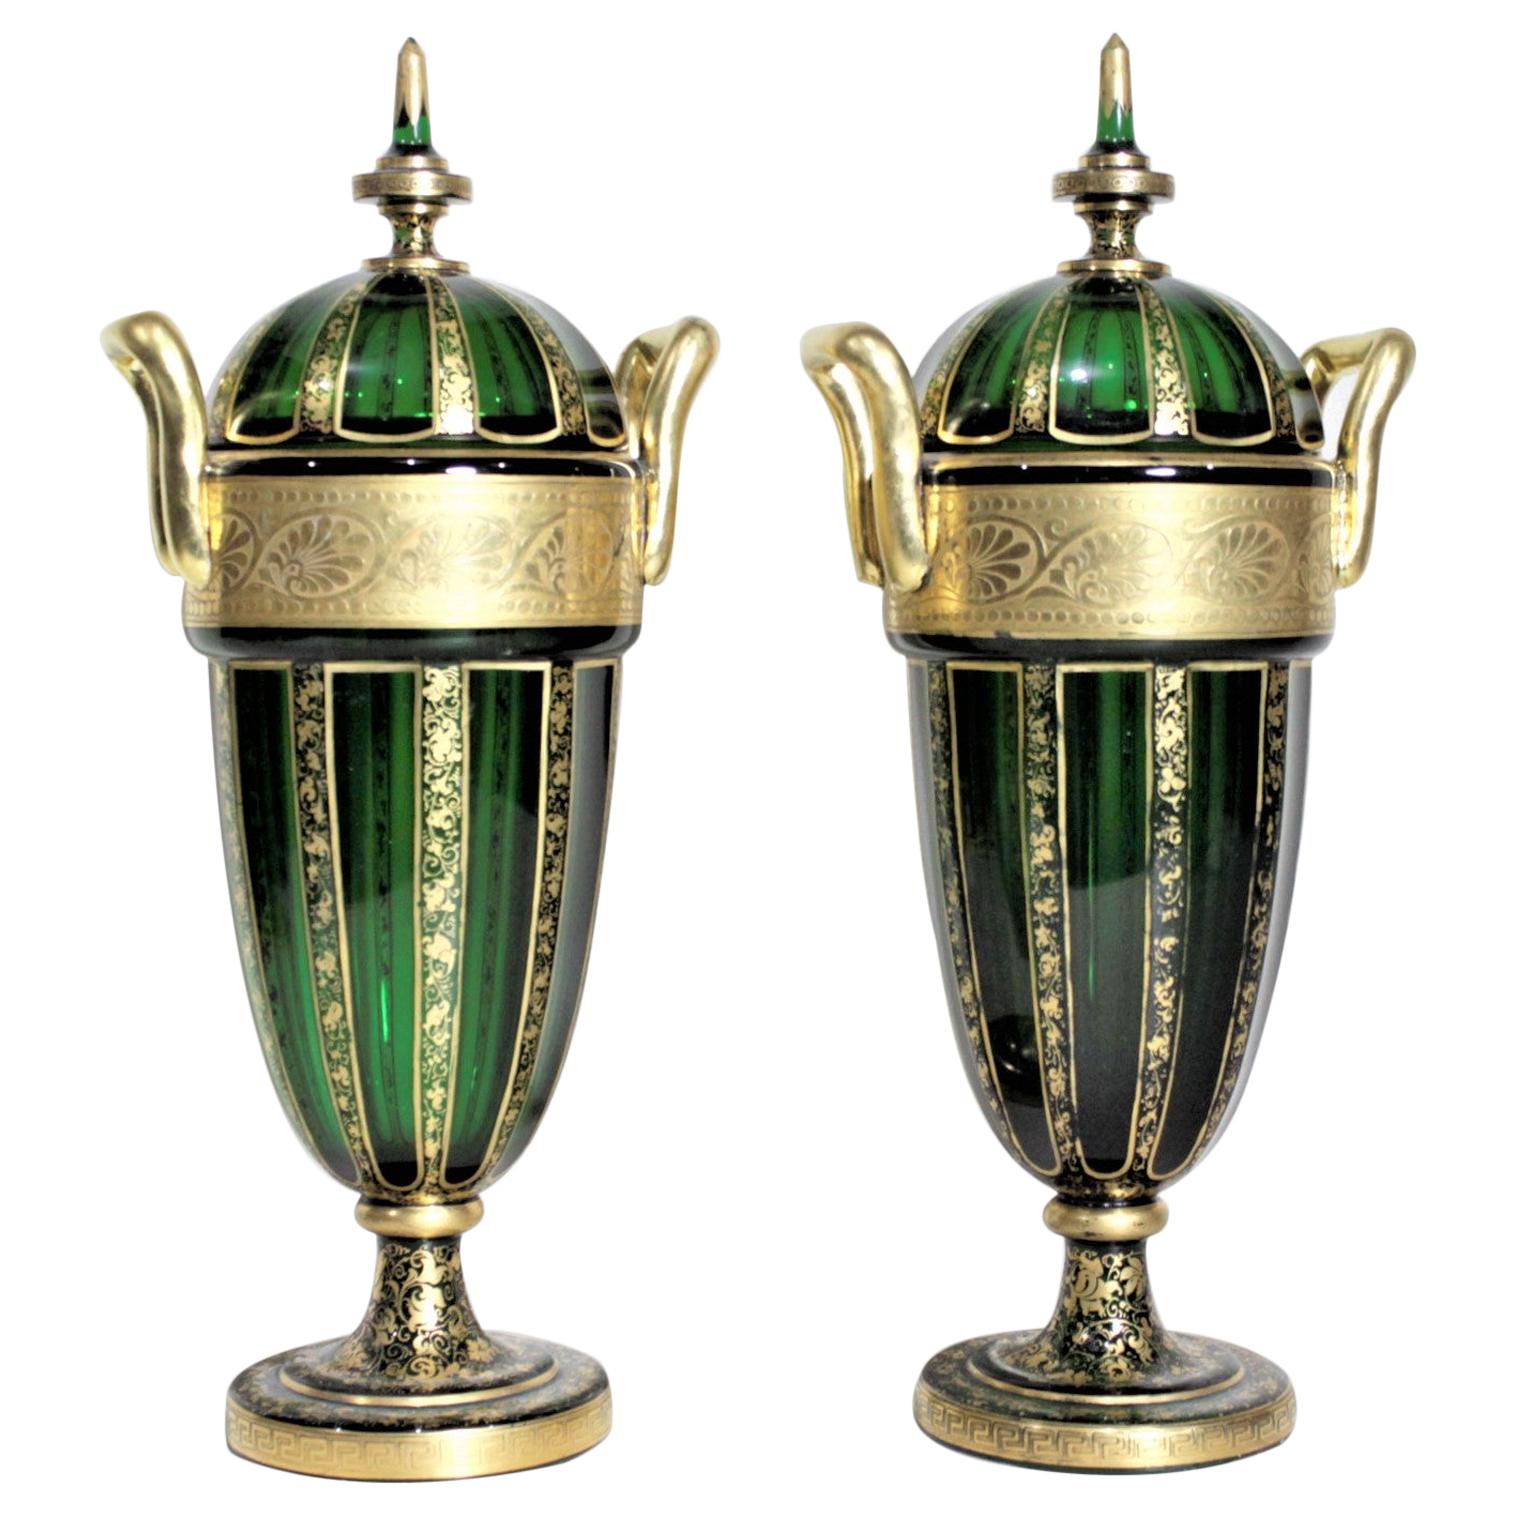 Pair of Antique Green Bohemian Covered Glass Urns with Heavy Gilt Decoration